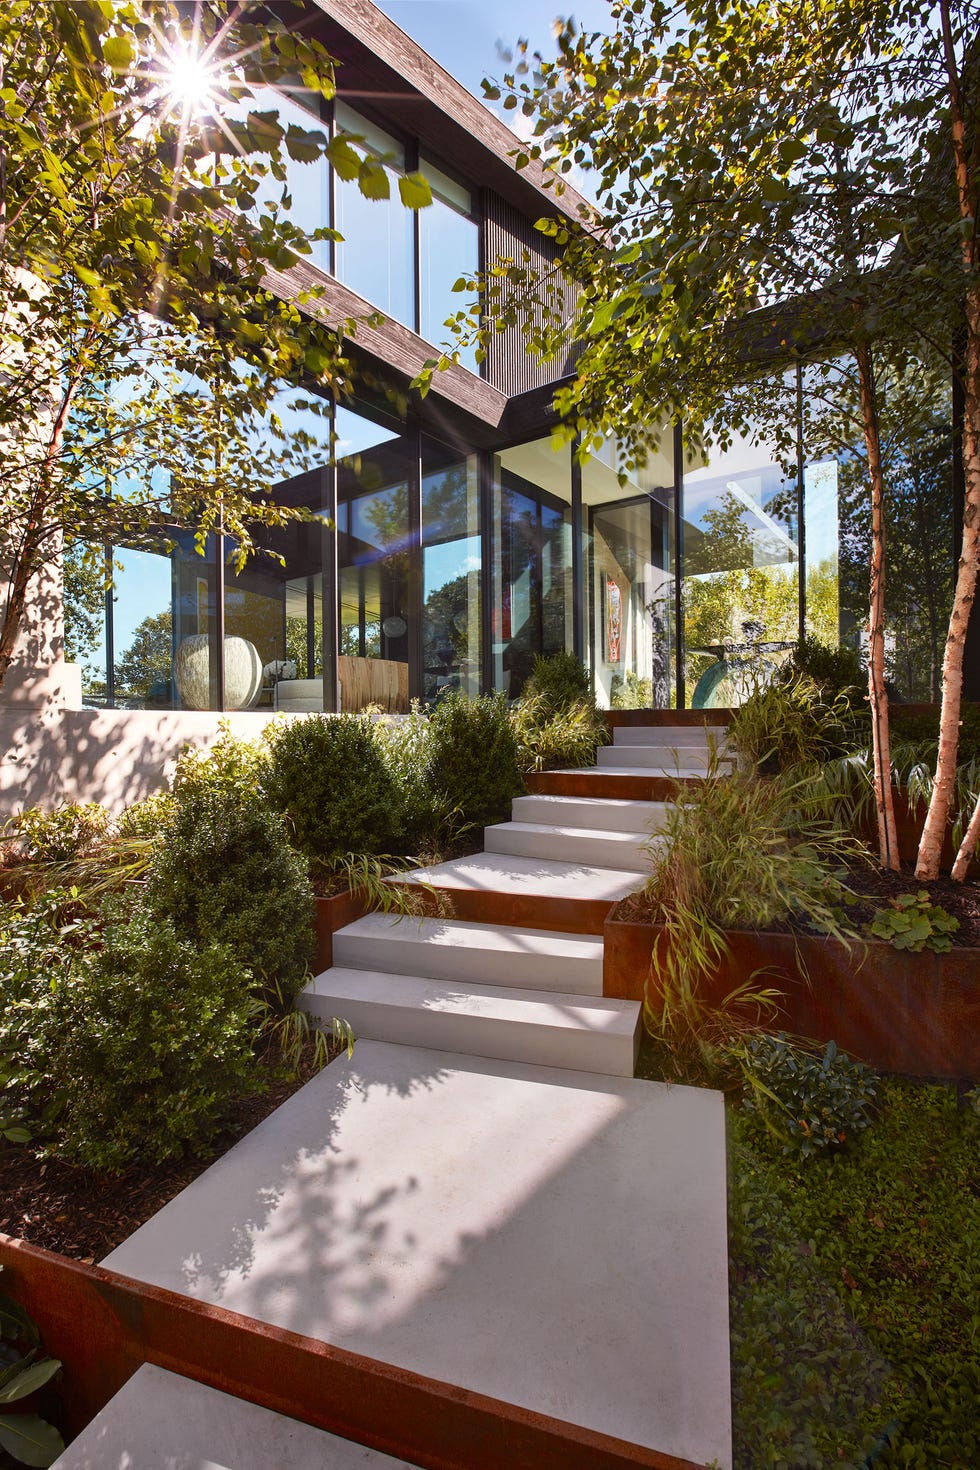 a courtyard's limestone steps lined with shrubs and grasses and birch trees lead to the main entry with floor to ceiling glass walls